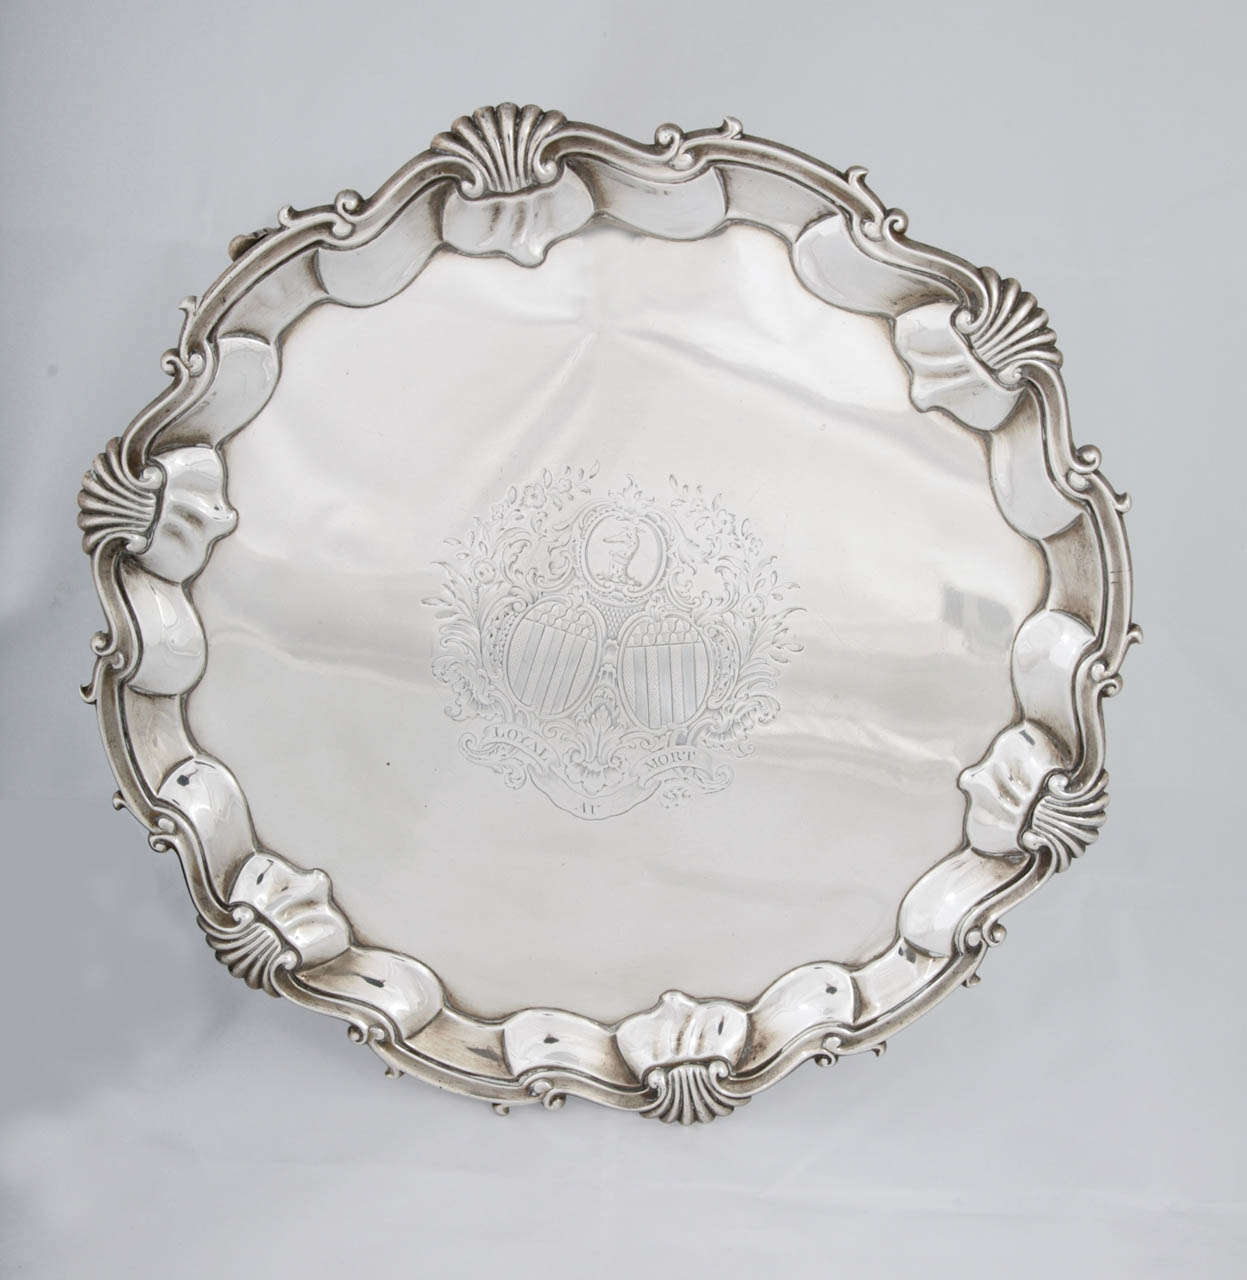 Large silver salver by William Justis. Hallmarked for 1752 with the initials WI for the maker. The coat of arms engraved on the front are for Jonathan Belcher, Govenor-in-Chief of the province of Nova Scotia and later Governor of the Province of New